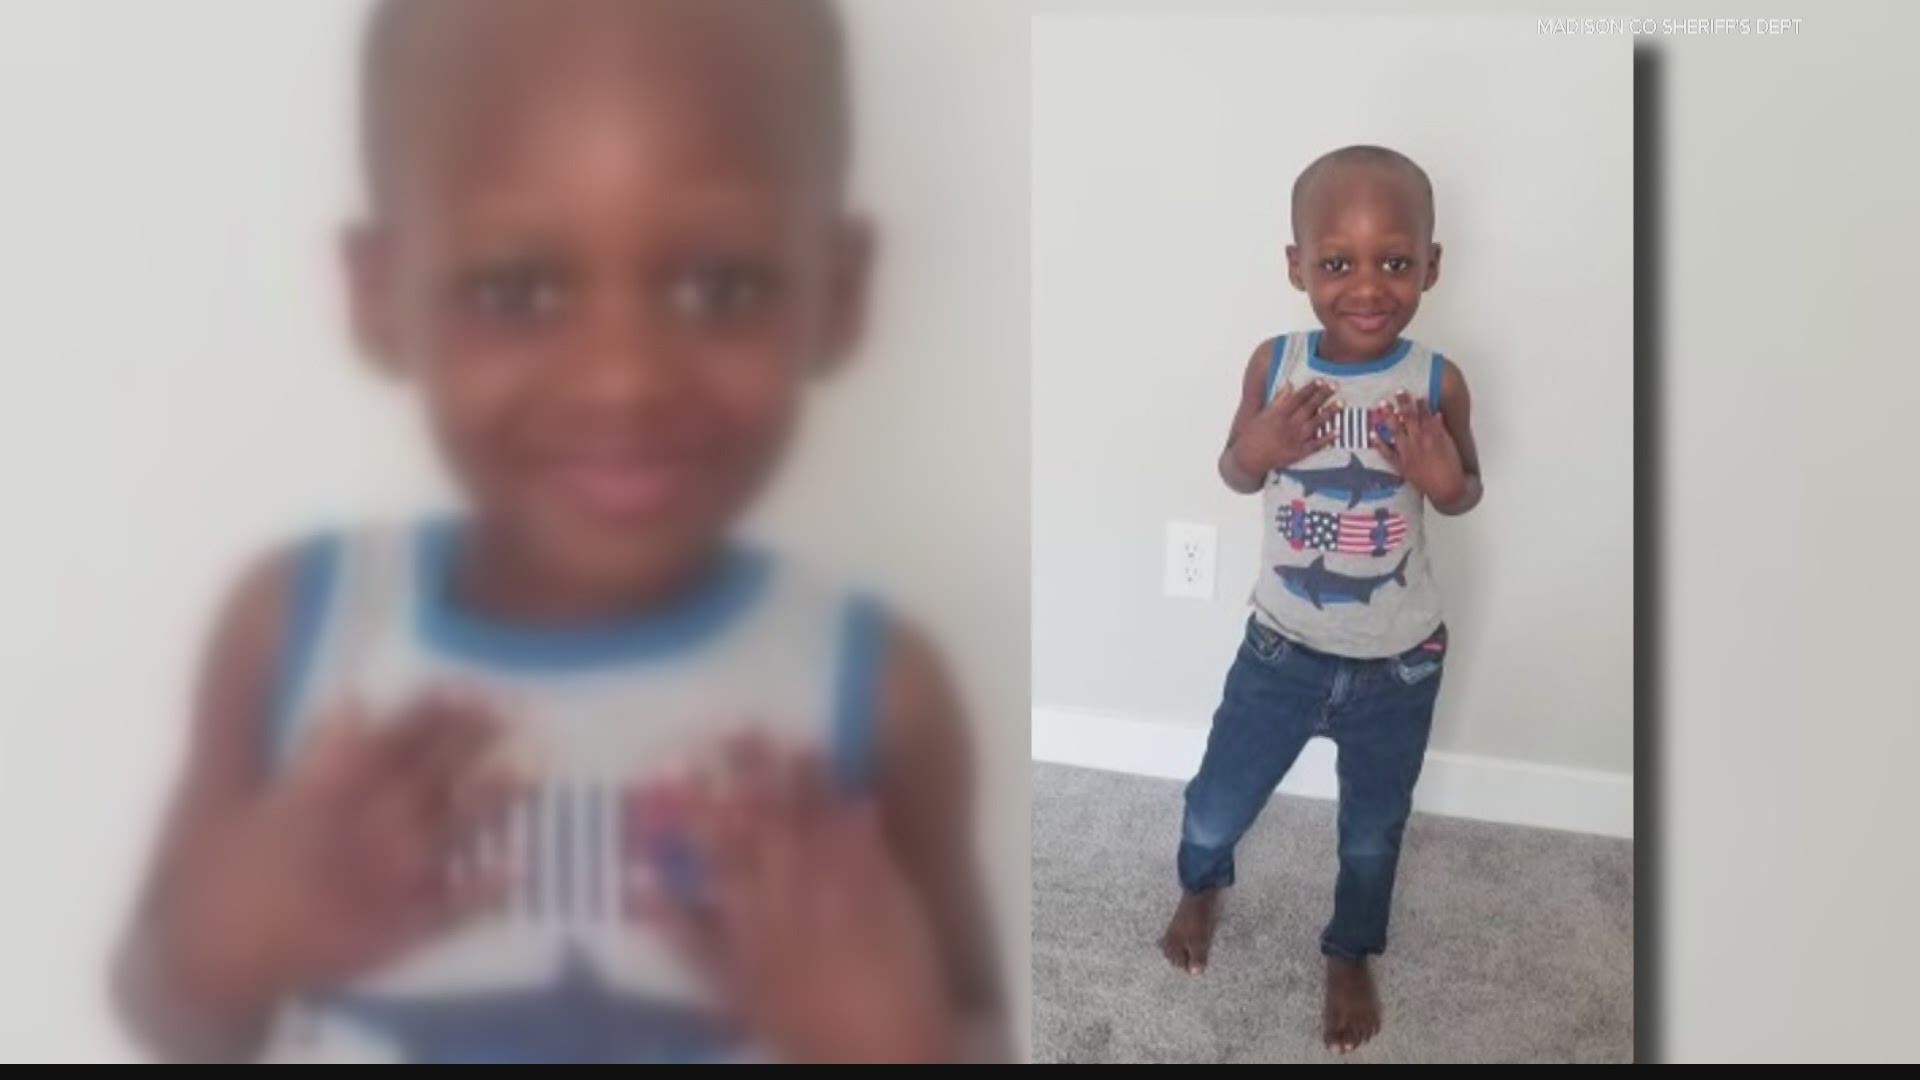 A missing 3-year-old boy from Madison County was found safe Wednesday morning.